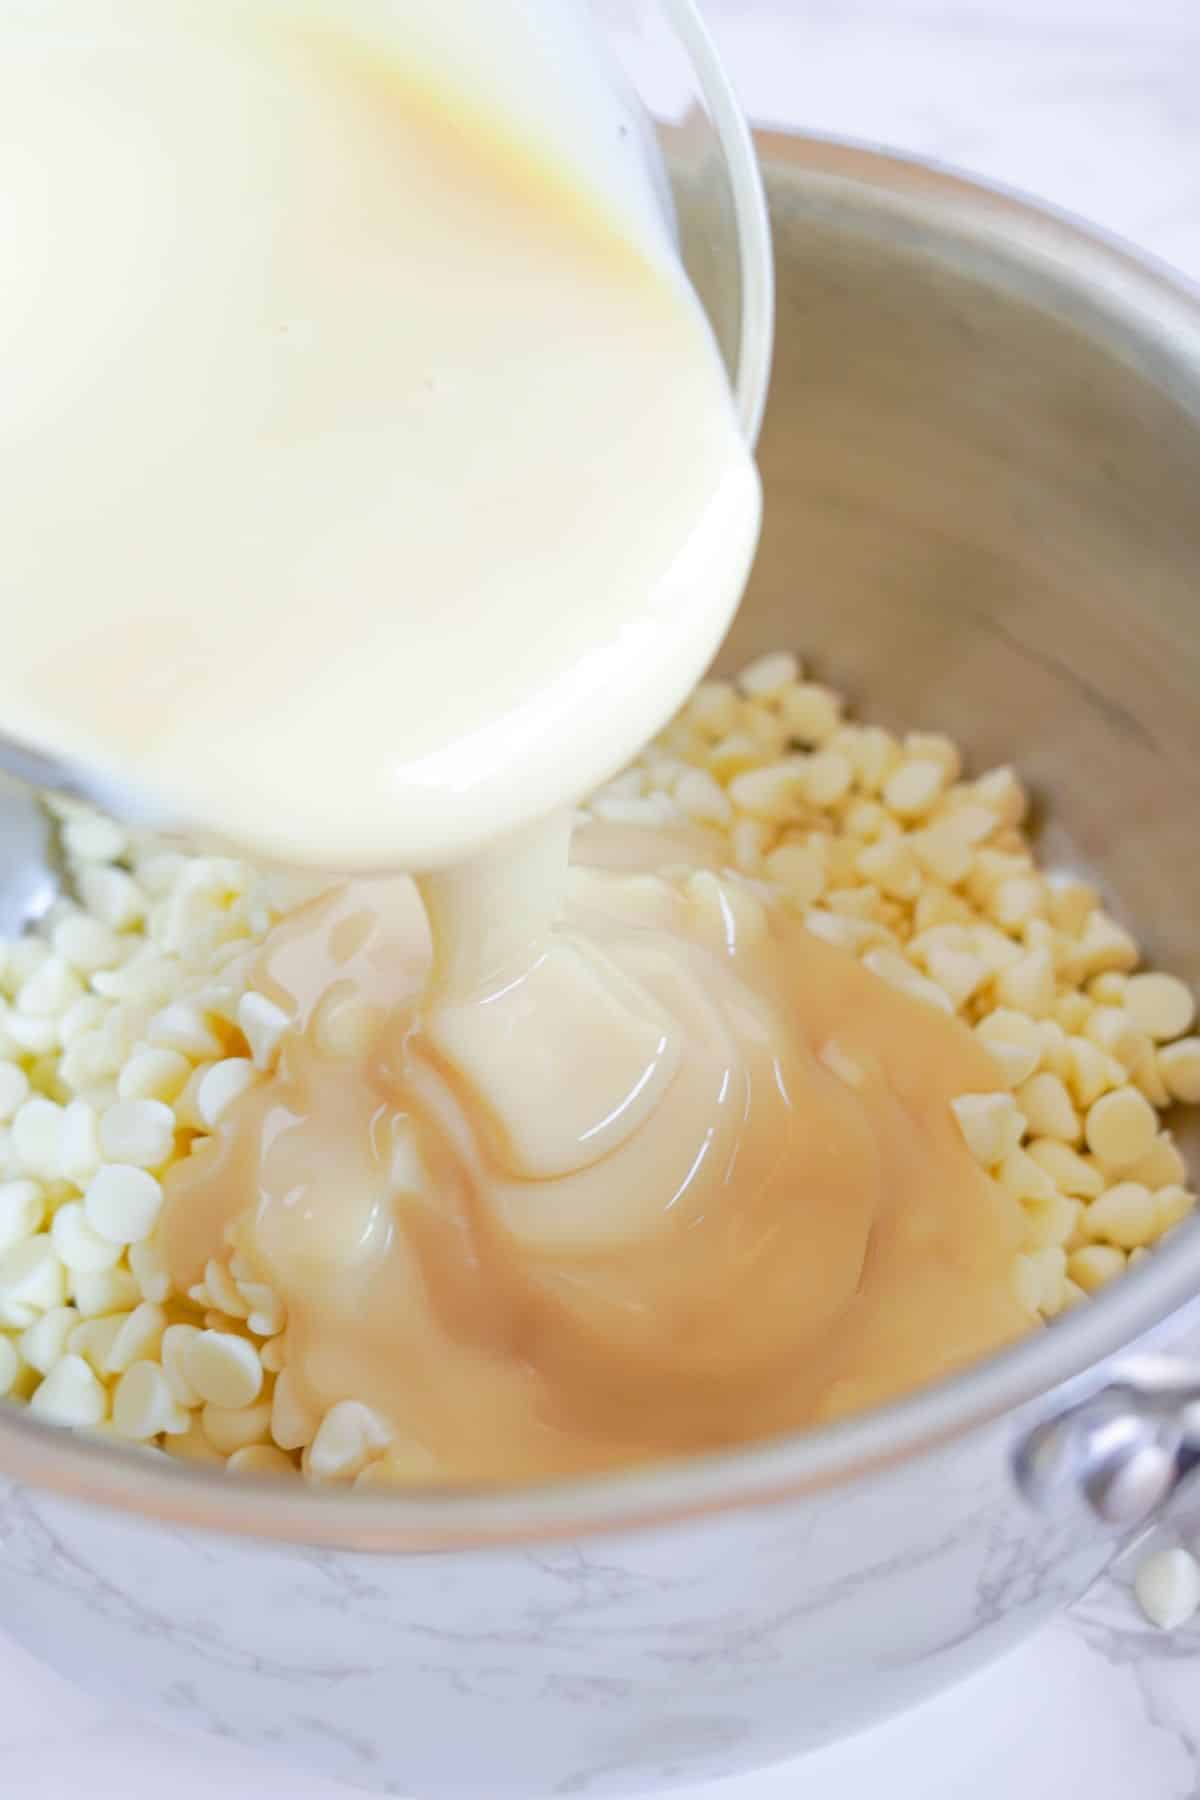 pour condensed milk on white chocolate chips